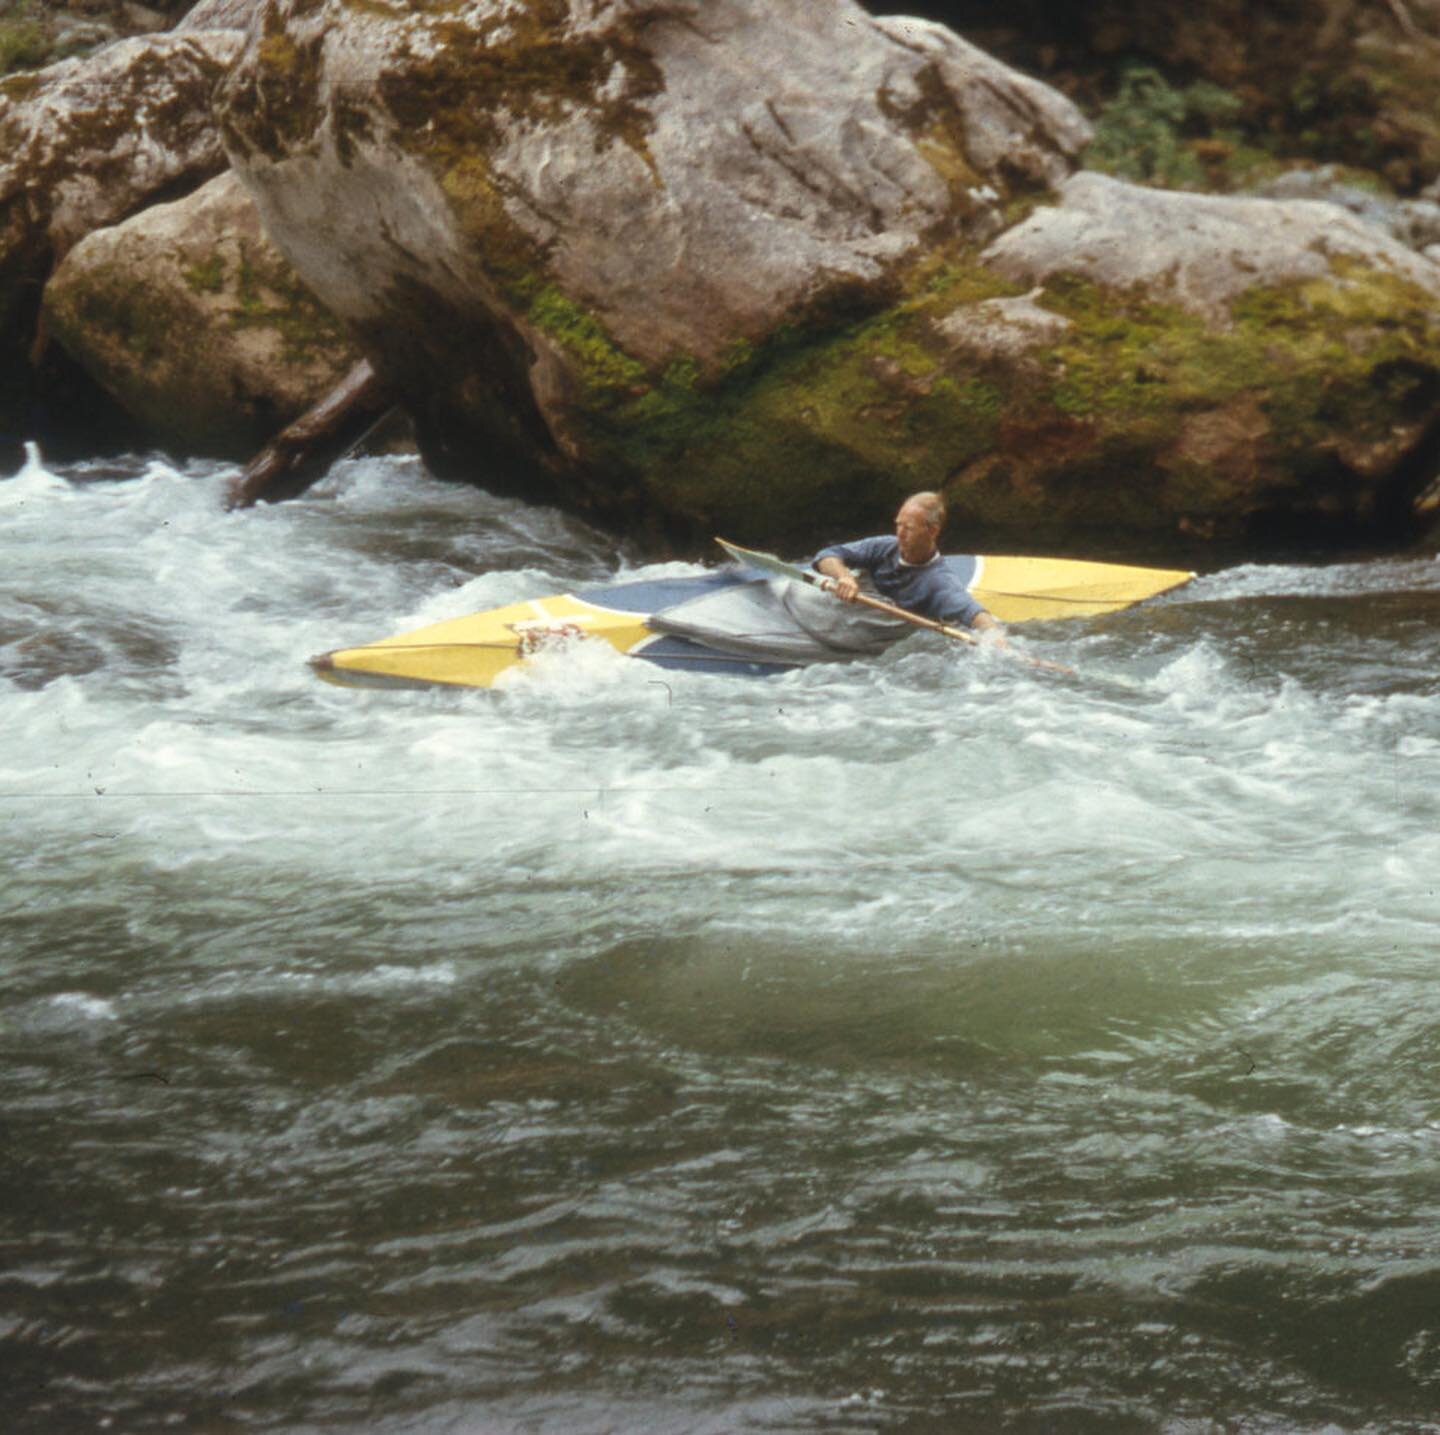 The fact that I can look at these photographs that Wolf Bauer took of his kayaking trips in the Green River Gorge is a testament of how one person can make a difference in the world. 

As a result of Wolf Bauer's exploration of the Green River Gorge 